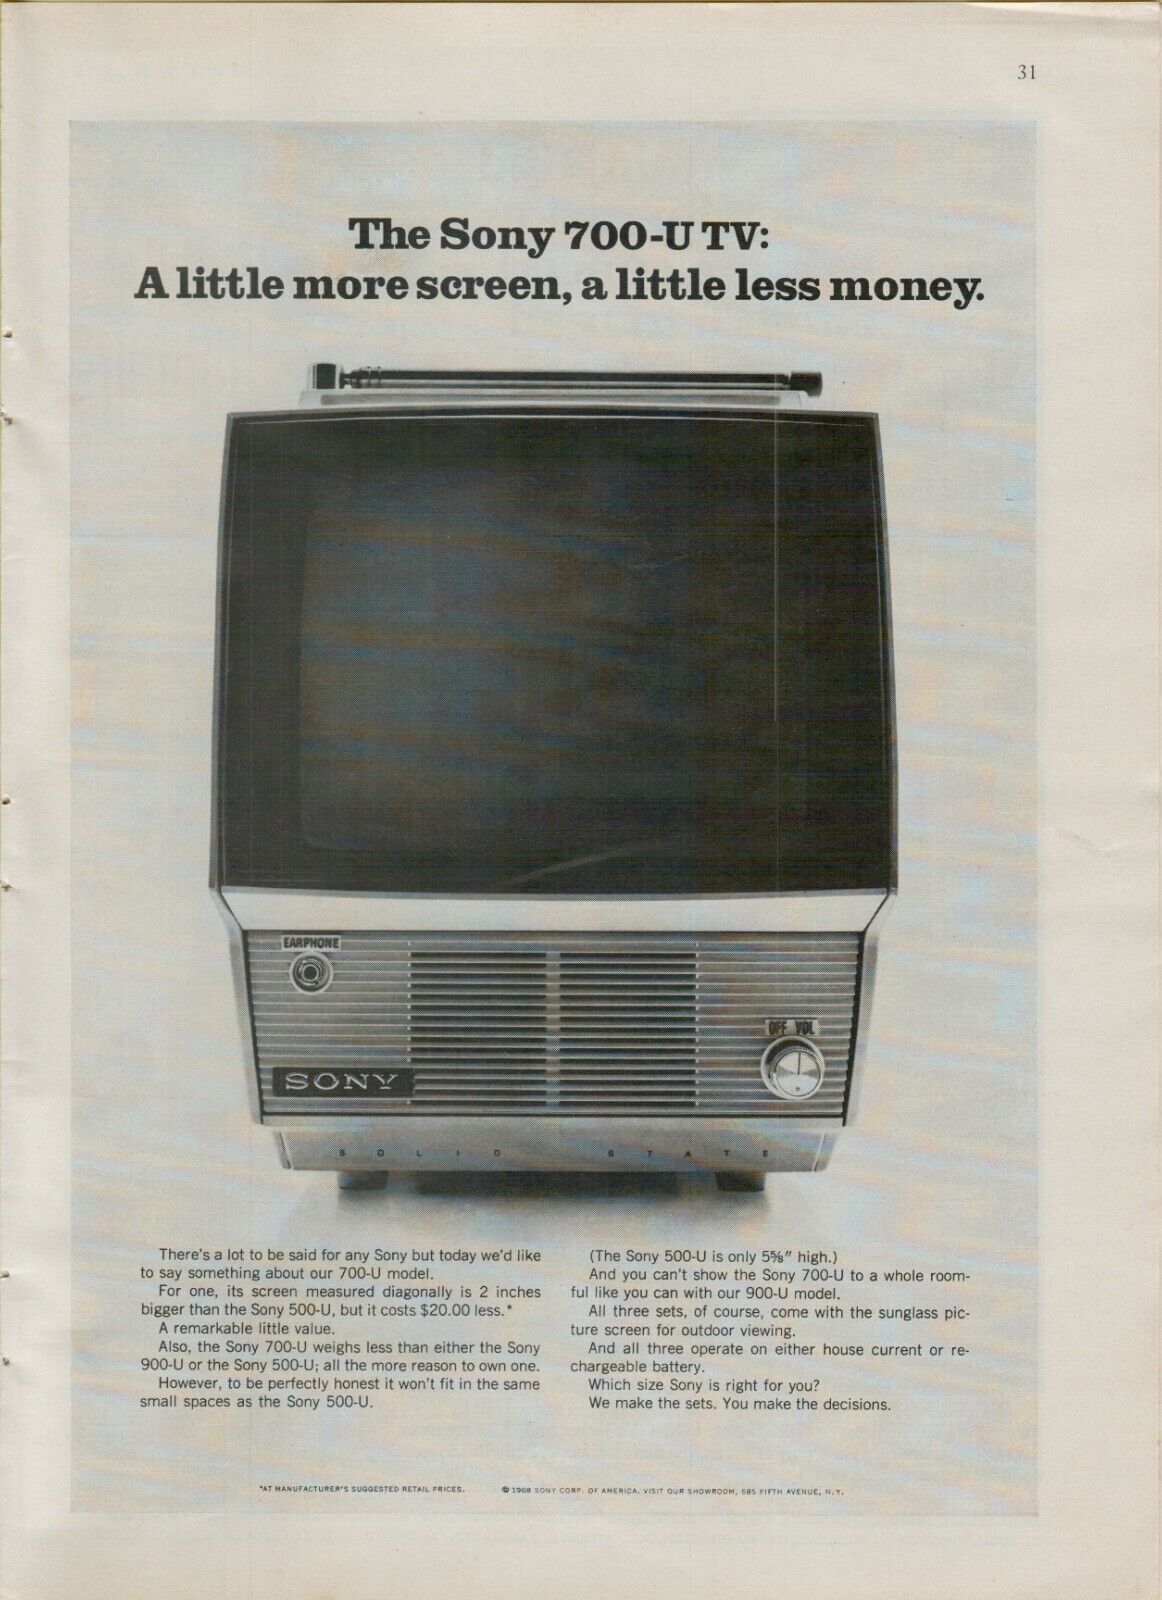 1968 Sony 700-U TV Which Size is Right for You Portable Photo VINTAGE PRINT AD